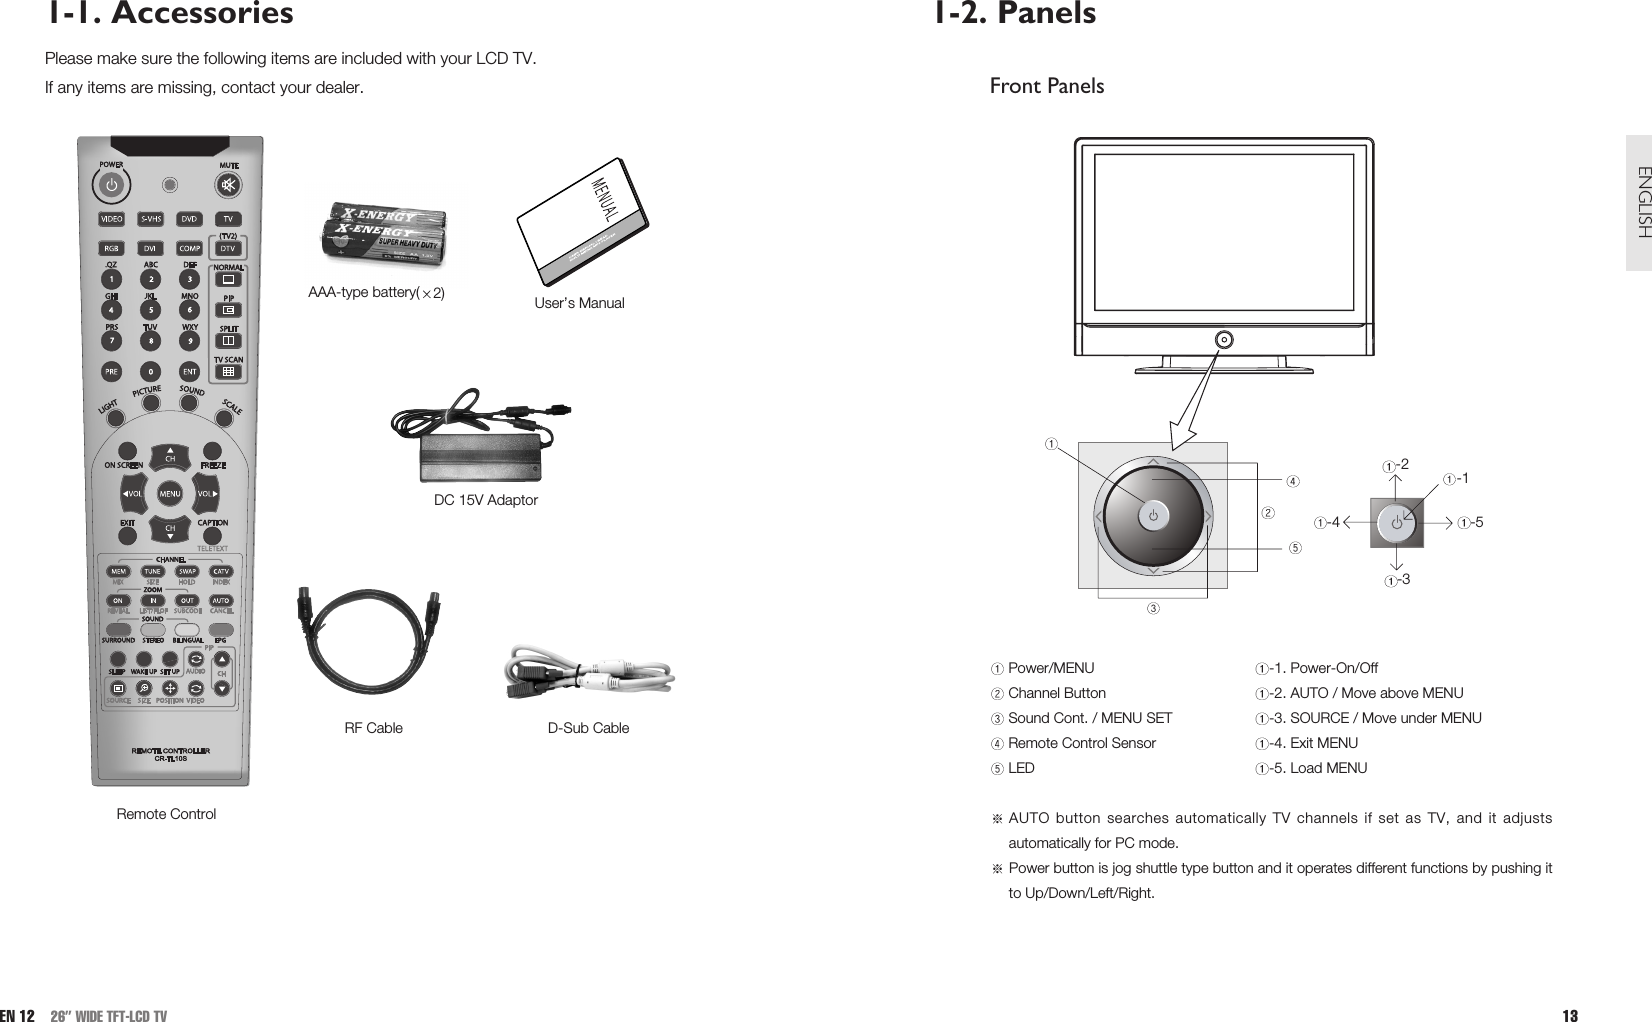 1-2. PanelsFront PanelsPower/MENU -1. Power-On/OffChannel Button -2. AUTO / Move above MENU Sound Cont. / MENU SET -3. SOURCE / Move under MENURemote Control Sensor -4. Exit MENULED -5. Load MENUAUTO button searches automatically TV channels if set as TV, and it adjustsautomatically for PC mode. Power button is jog shuttle type button and it operates different functions by pushing itto Up/Down/Left/Right.13ENGLISH1-1. AccessoriesPlease make sure the following items are included with your LCD TV.If any items are missing, contact your dealer.EN 12 26” WIDE TFT-LCD TV-1-5-4-3-2 Remote ControlAAA-type battery( 2)DC 15V AdaptorUser’s ManualRF Cable D-Sub Cable